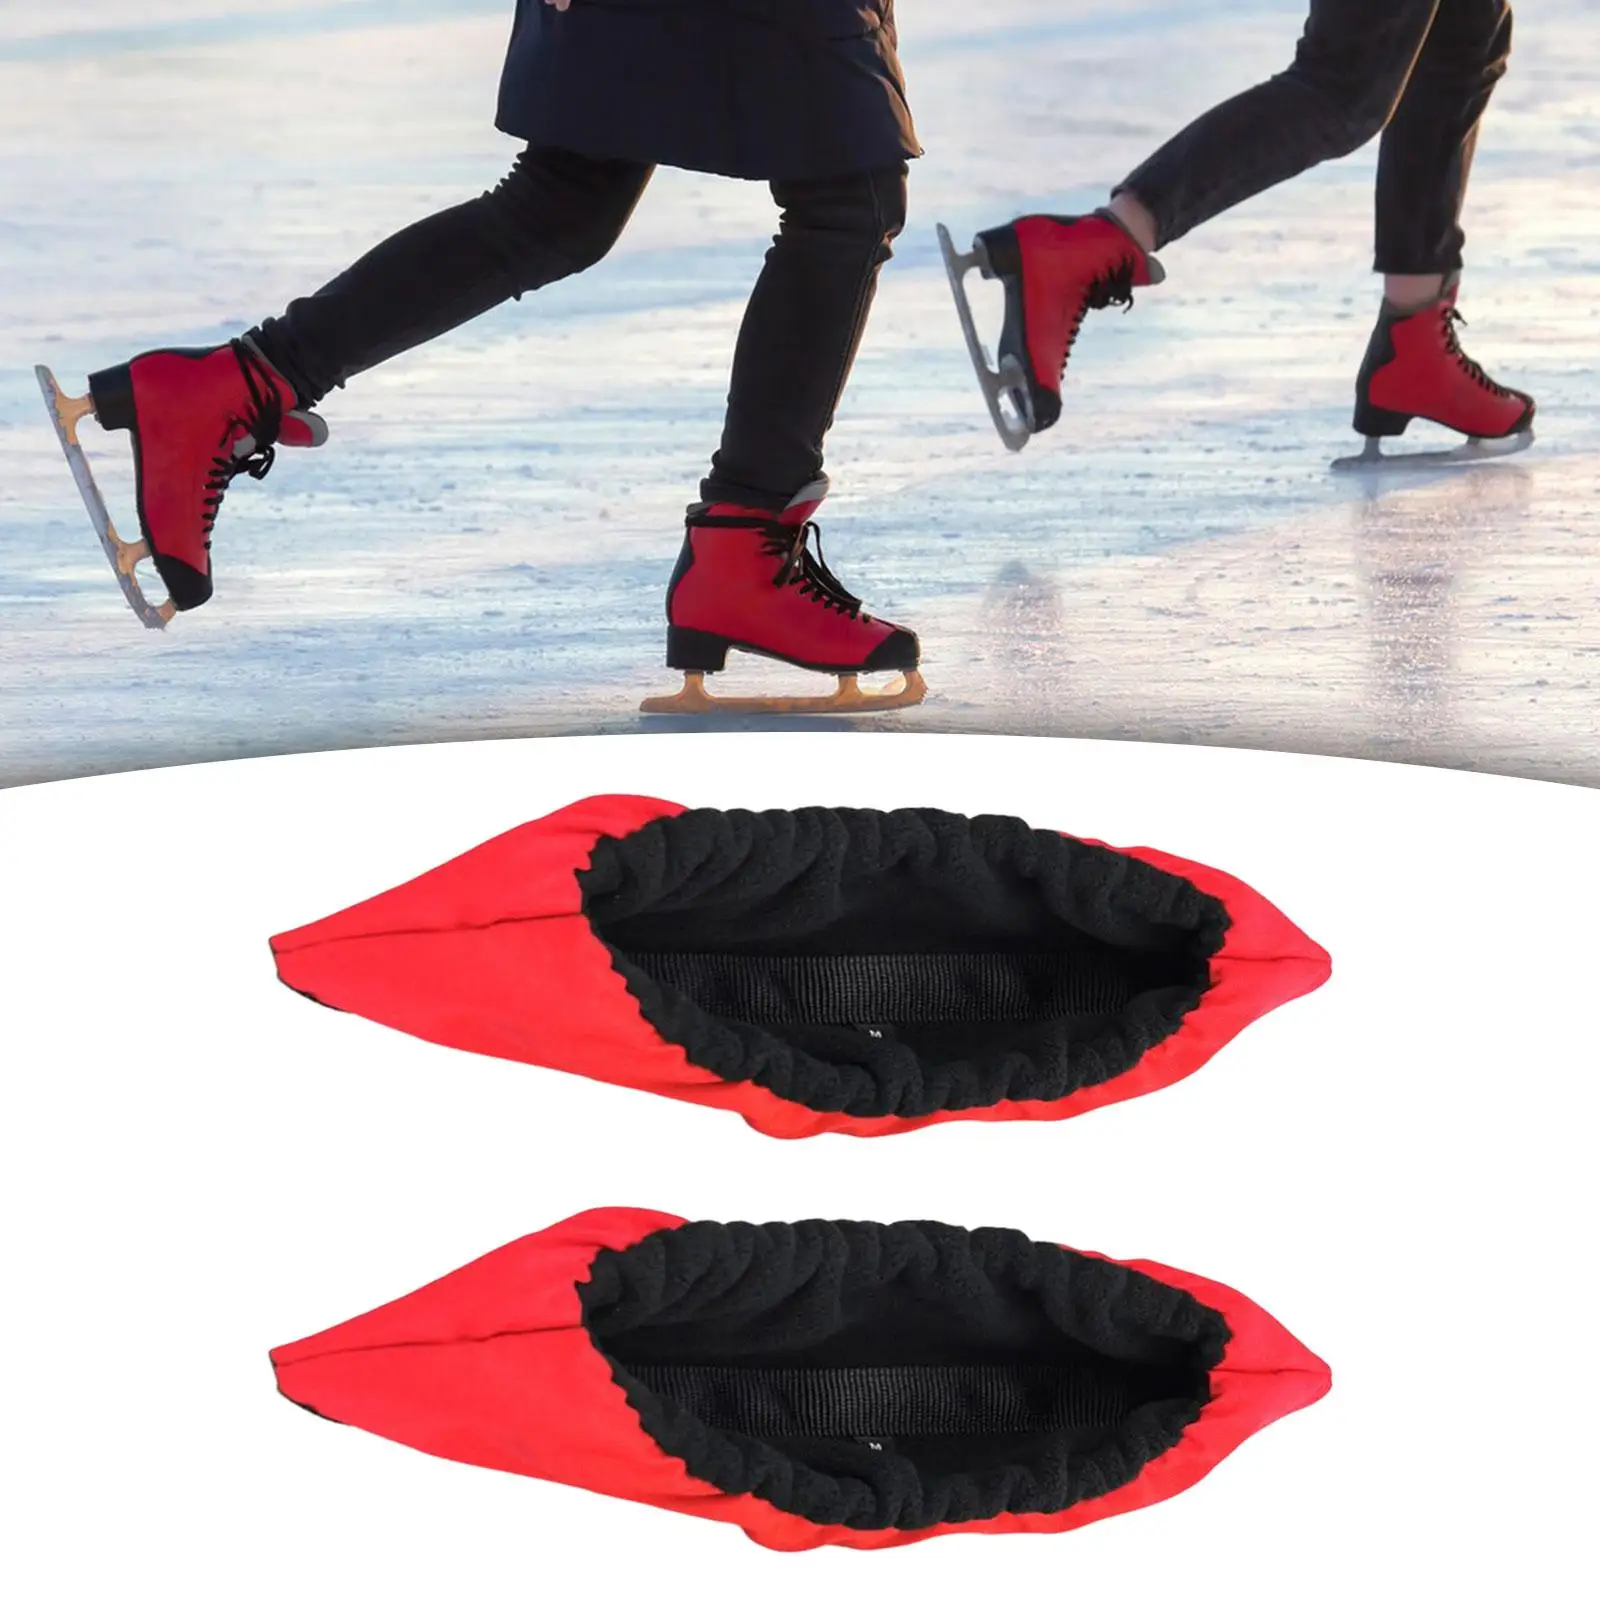 Ice Skate Blade Covers Figure Ice Roller Skates Boot Covers Overshoes Skating Guard Equipment Protection for Kids Adult